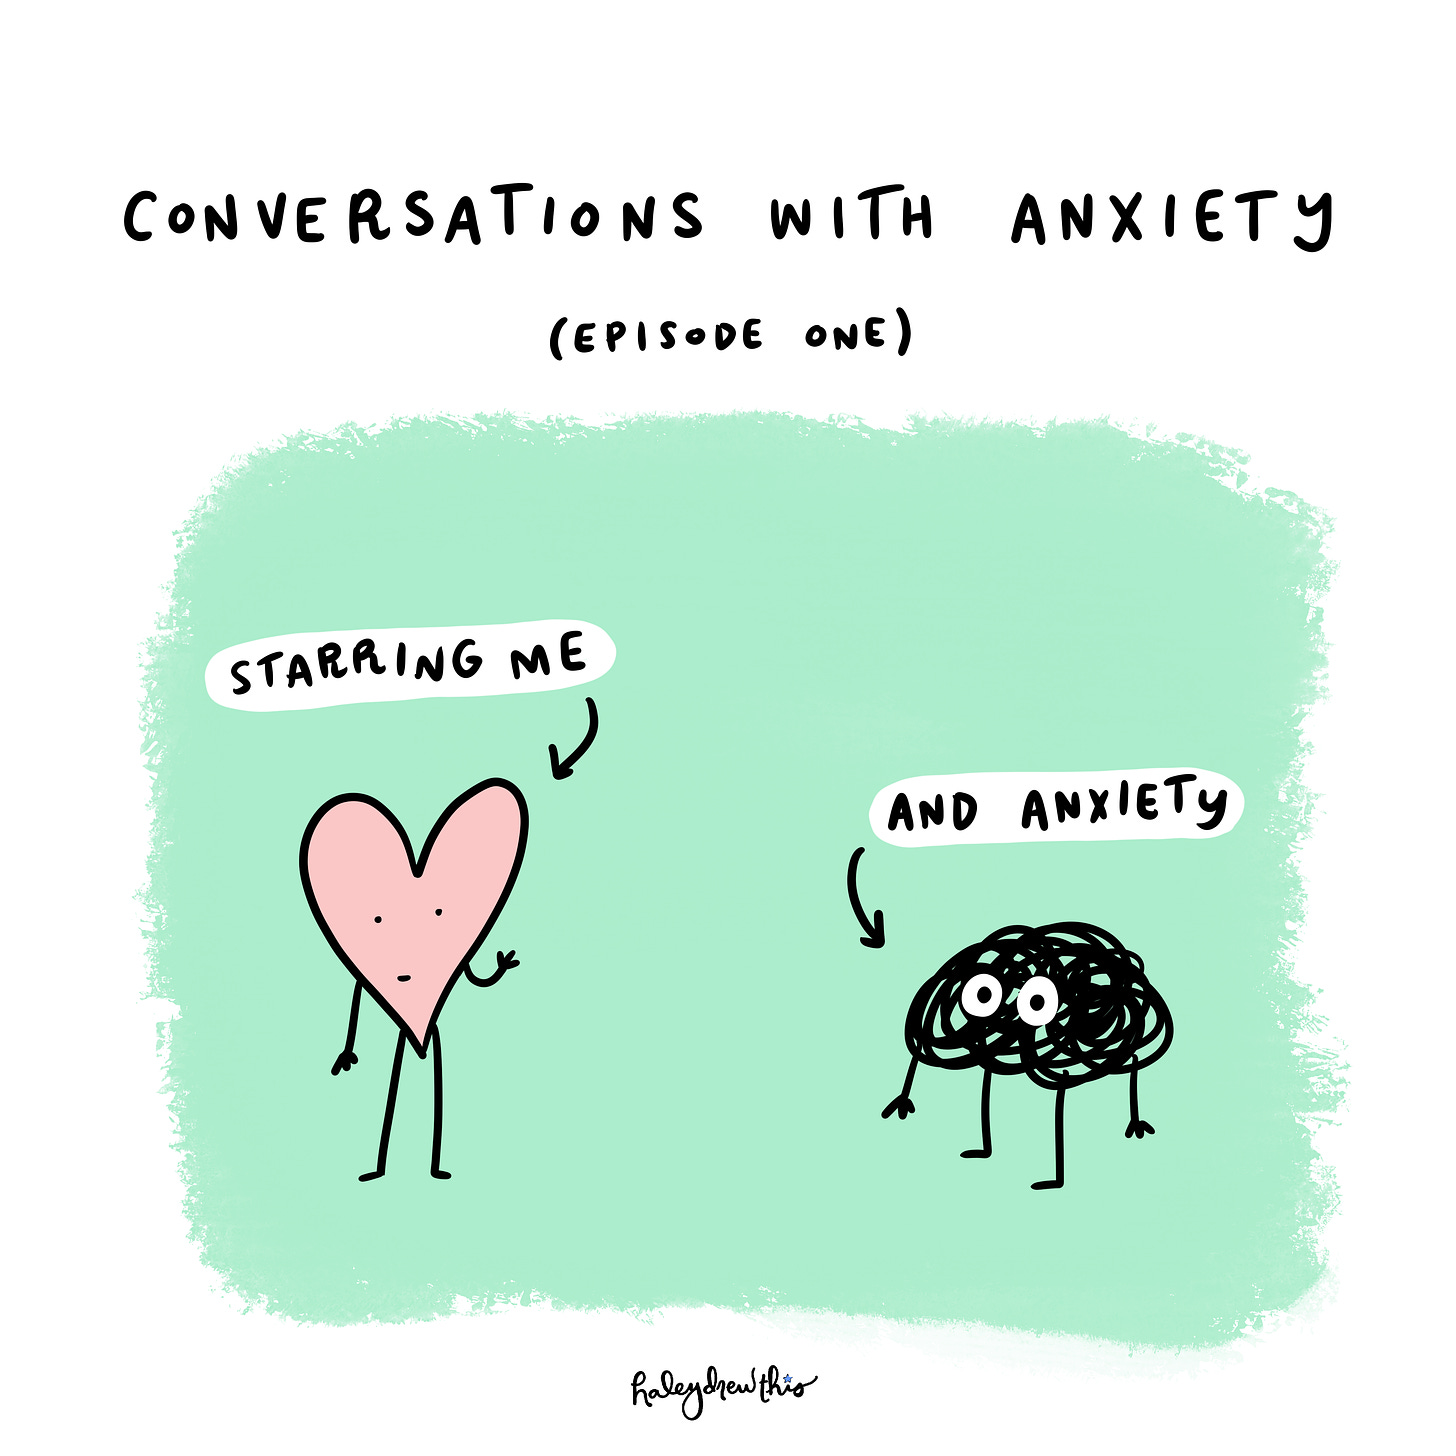 Conversations with Anxiety (episode one)